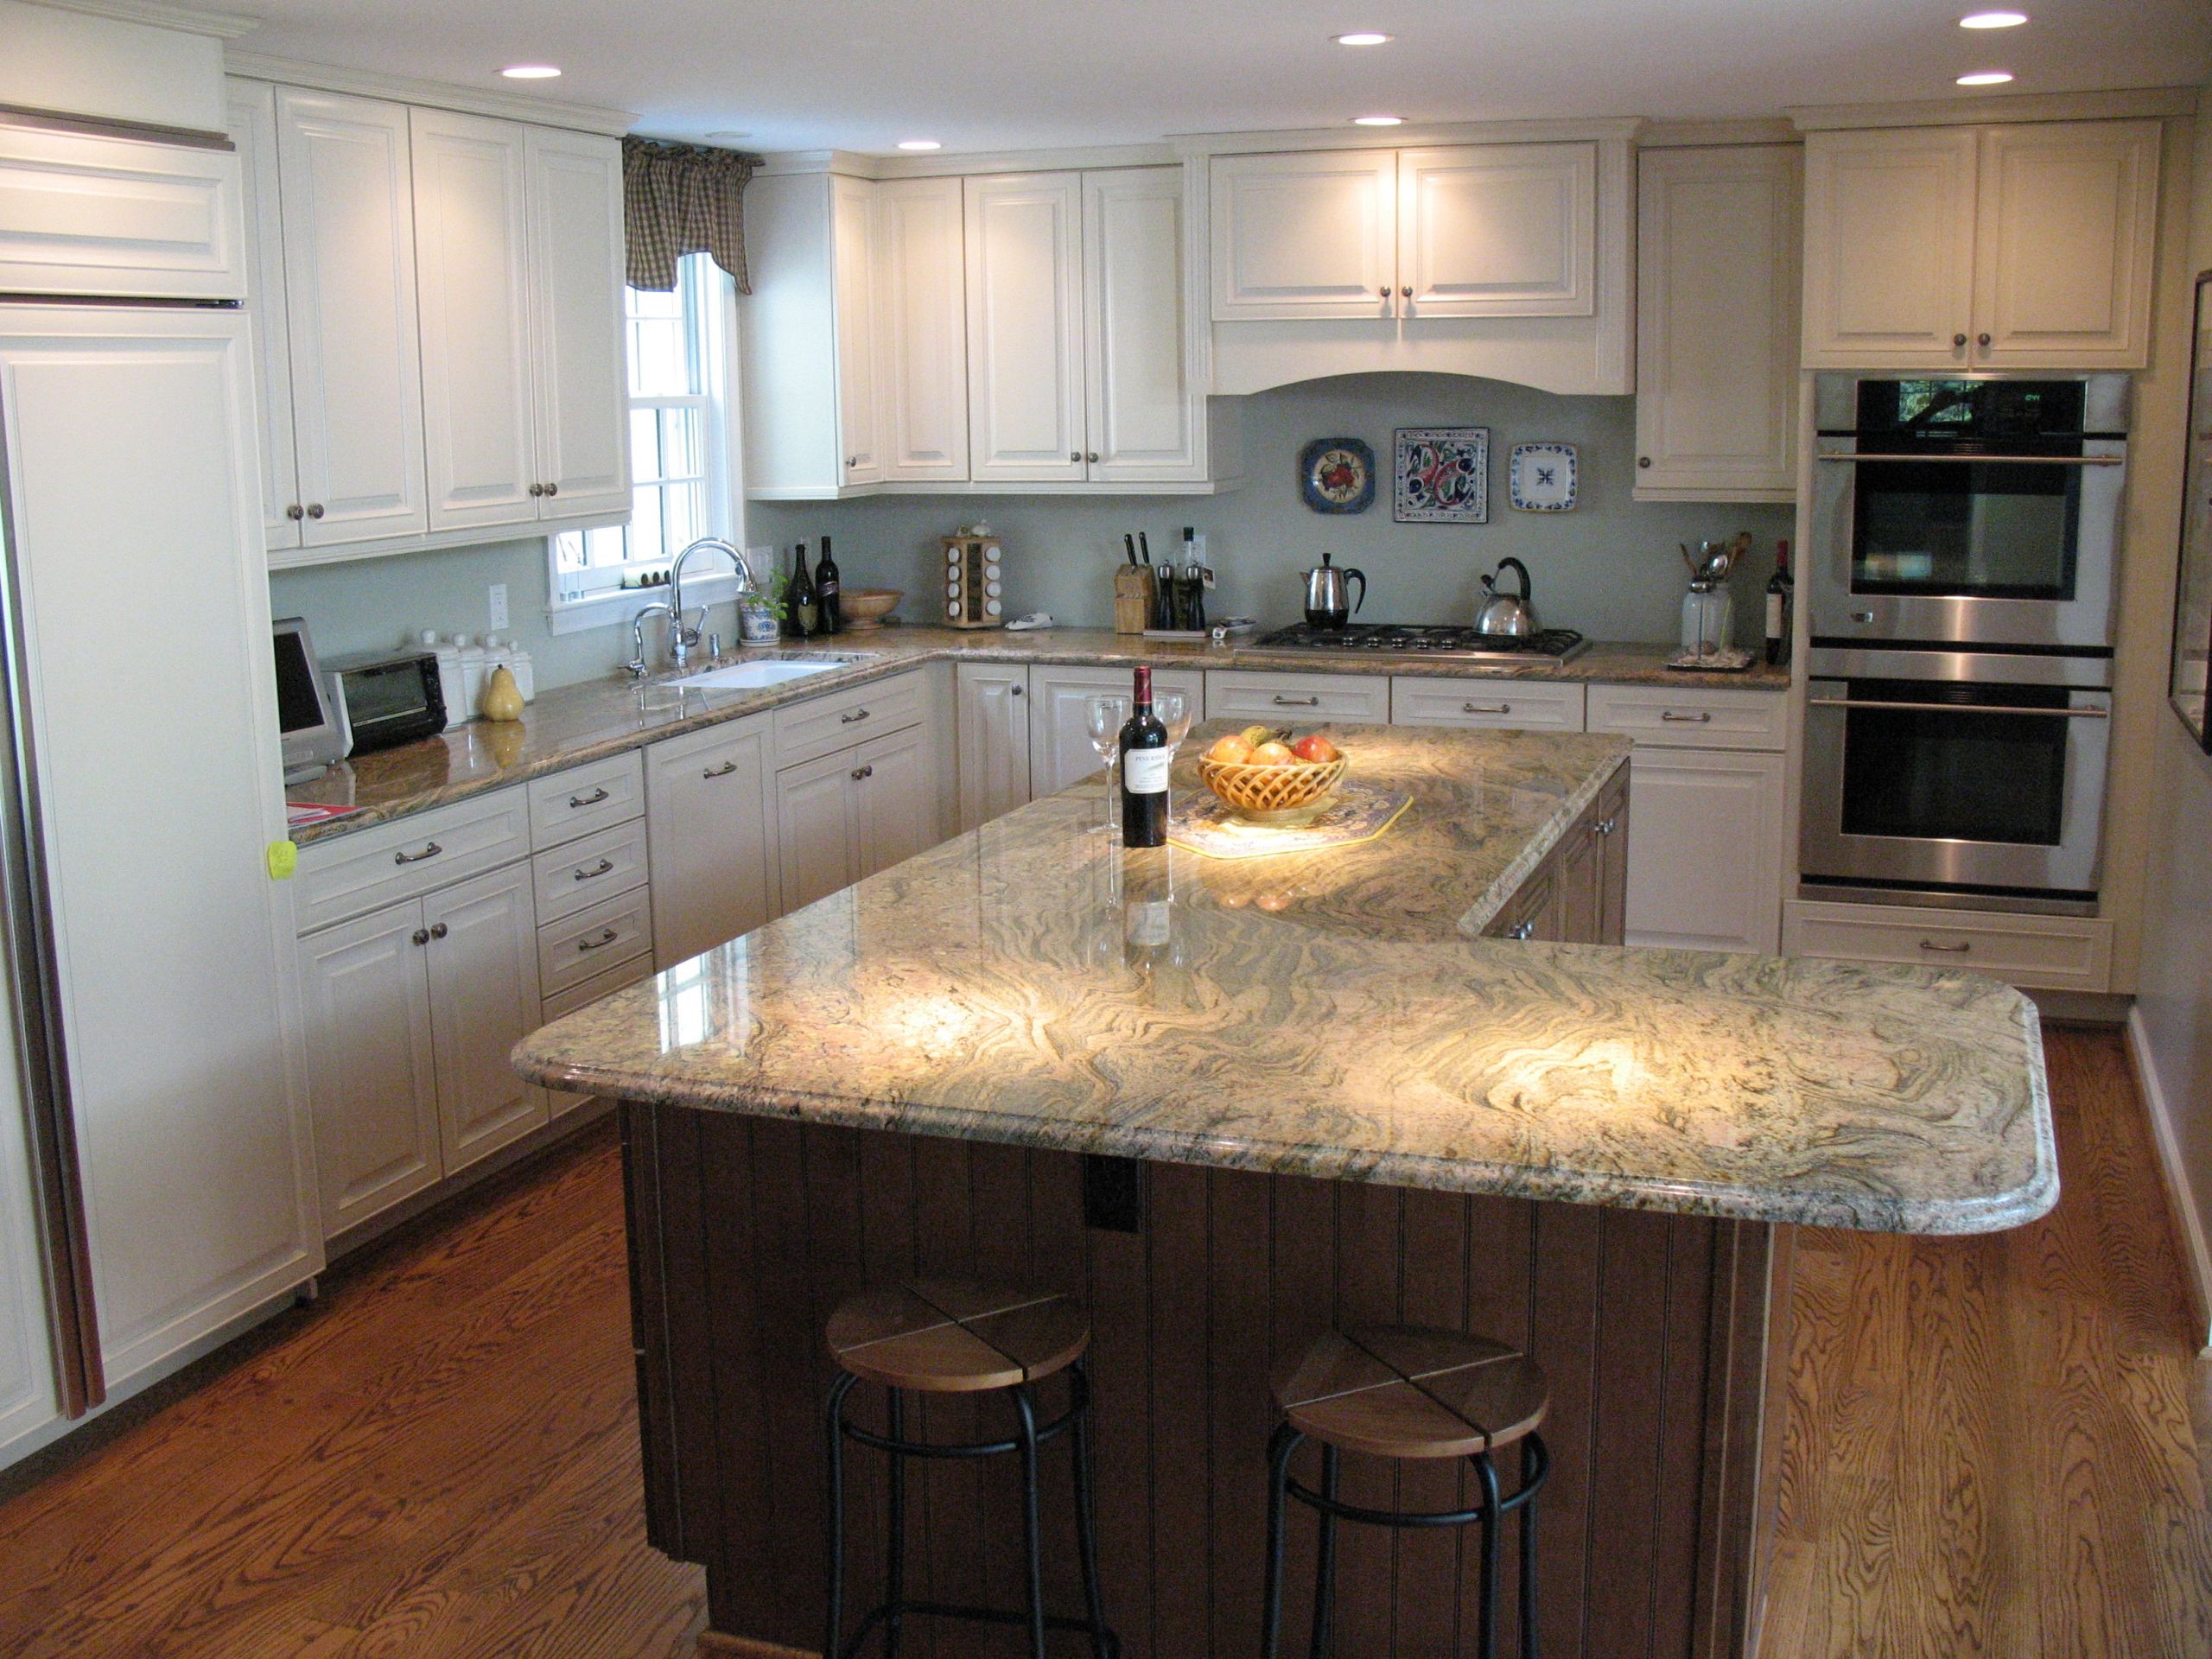 Kitchen Remodel Cost Calculator
 Kitchen Designs Remodel A Bud Hurry Inexpensive